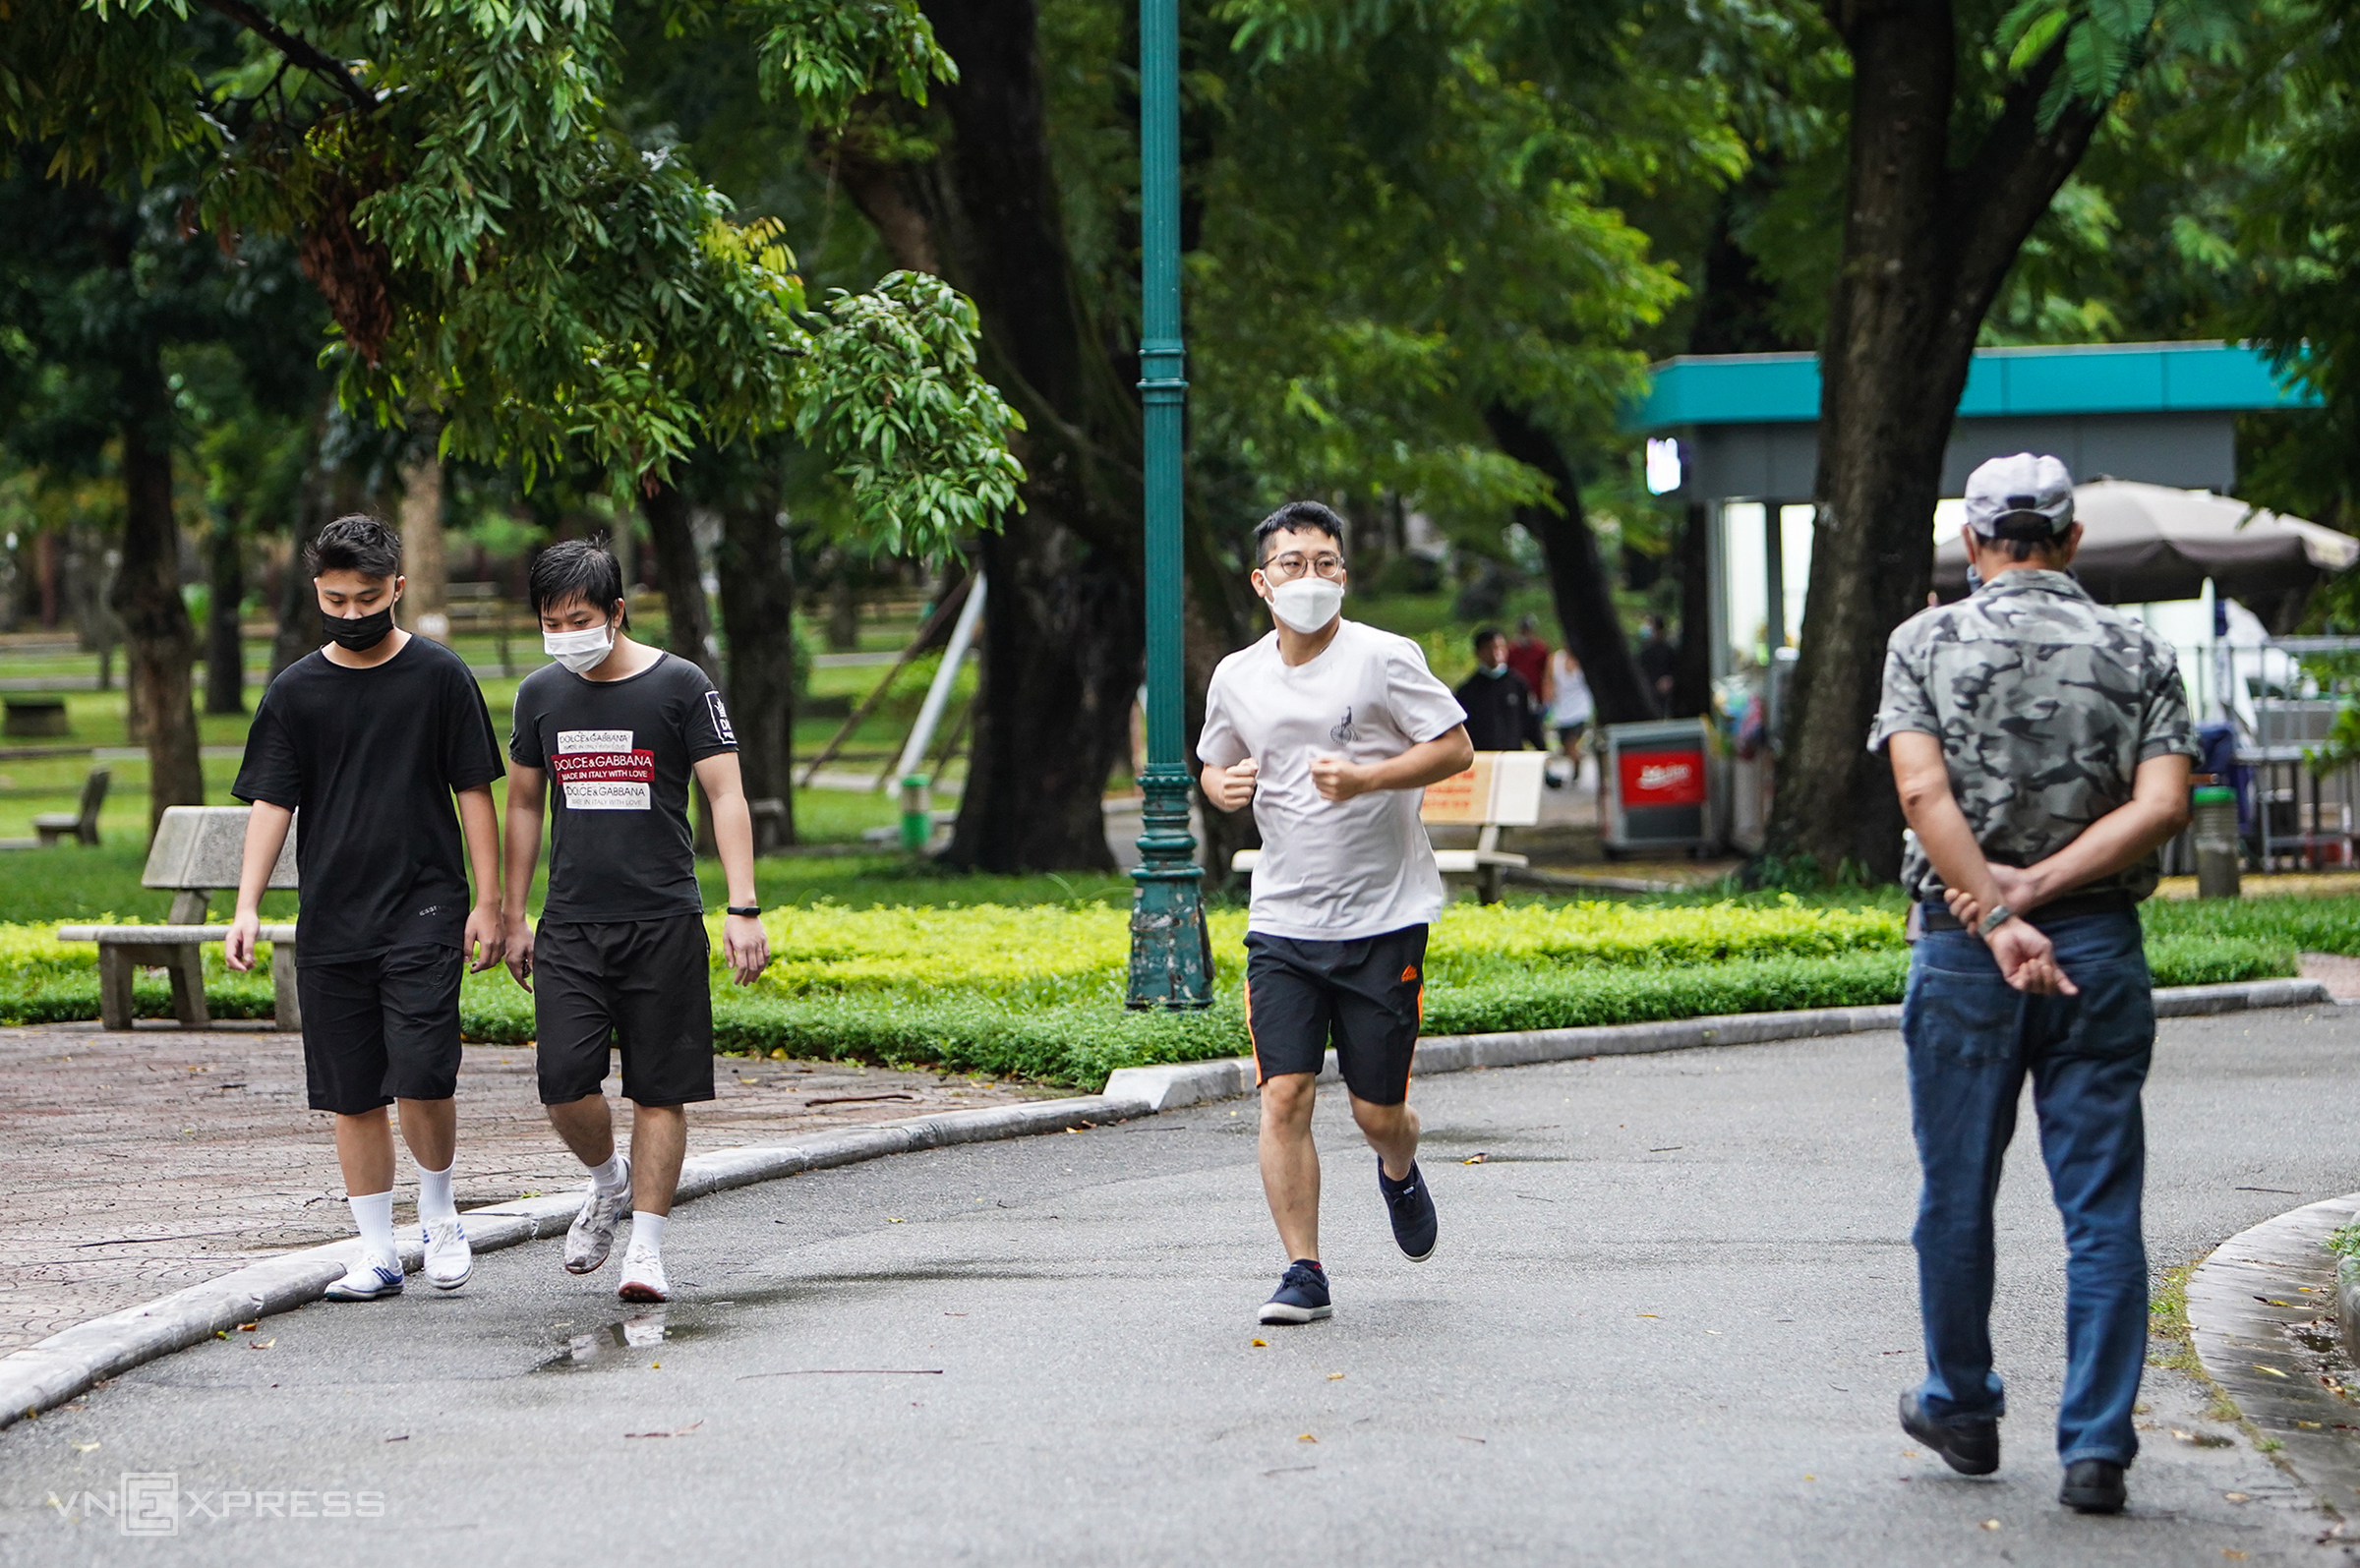 People walk and jog in a park in Hanoi, October 14, 2021. Photo by VnExpress/Giang Huy